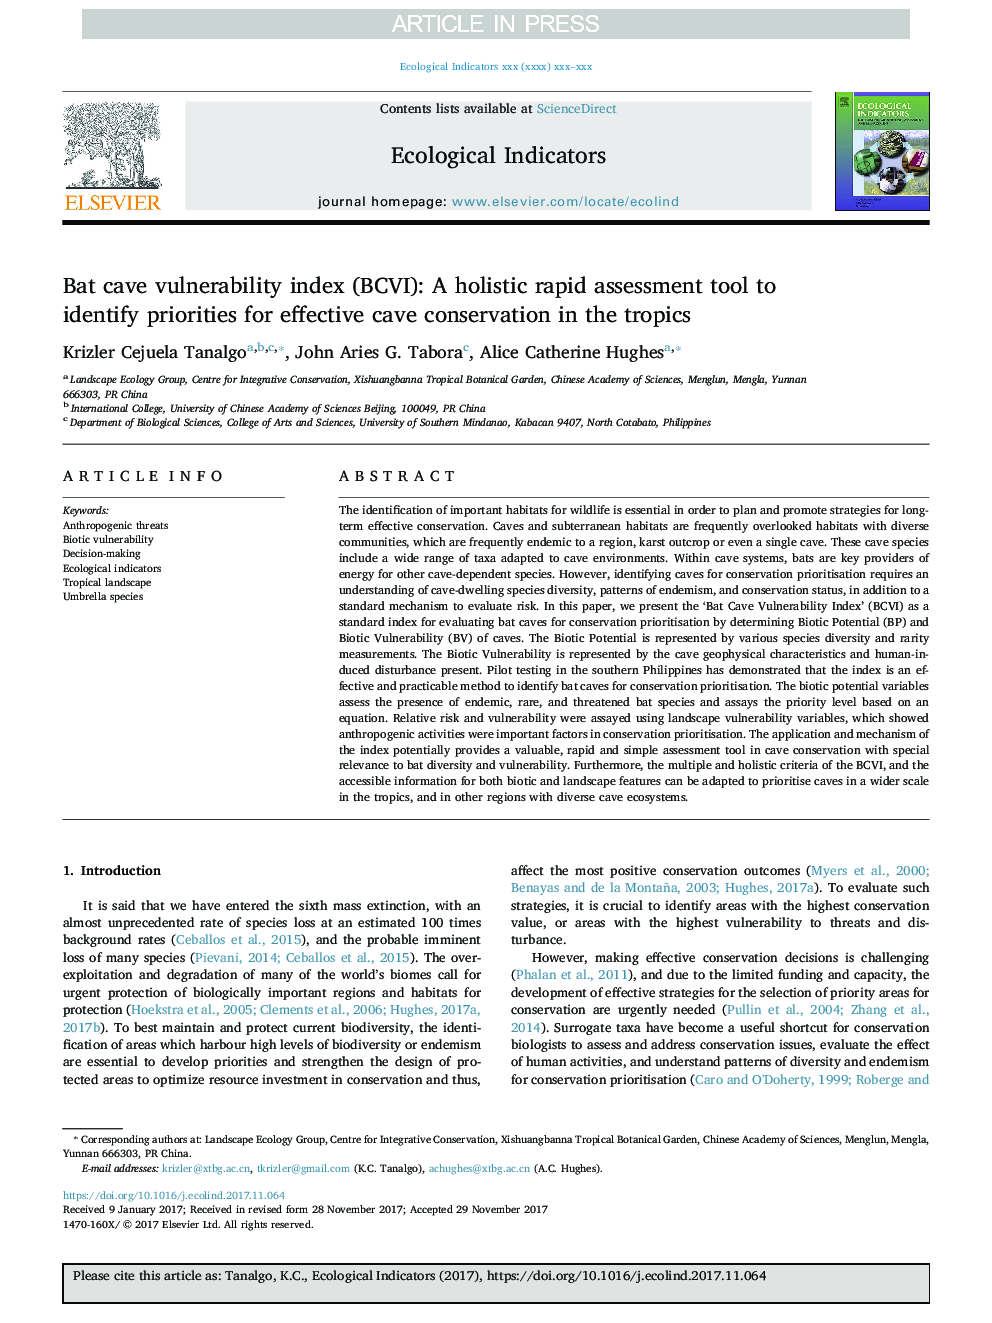 Bat cave vulnerability index (BCVI): A holistic rapid assessment tool to identify priorities for effective cave conservation in the tropics